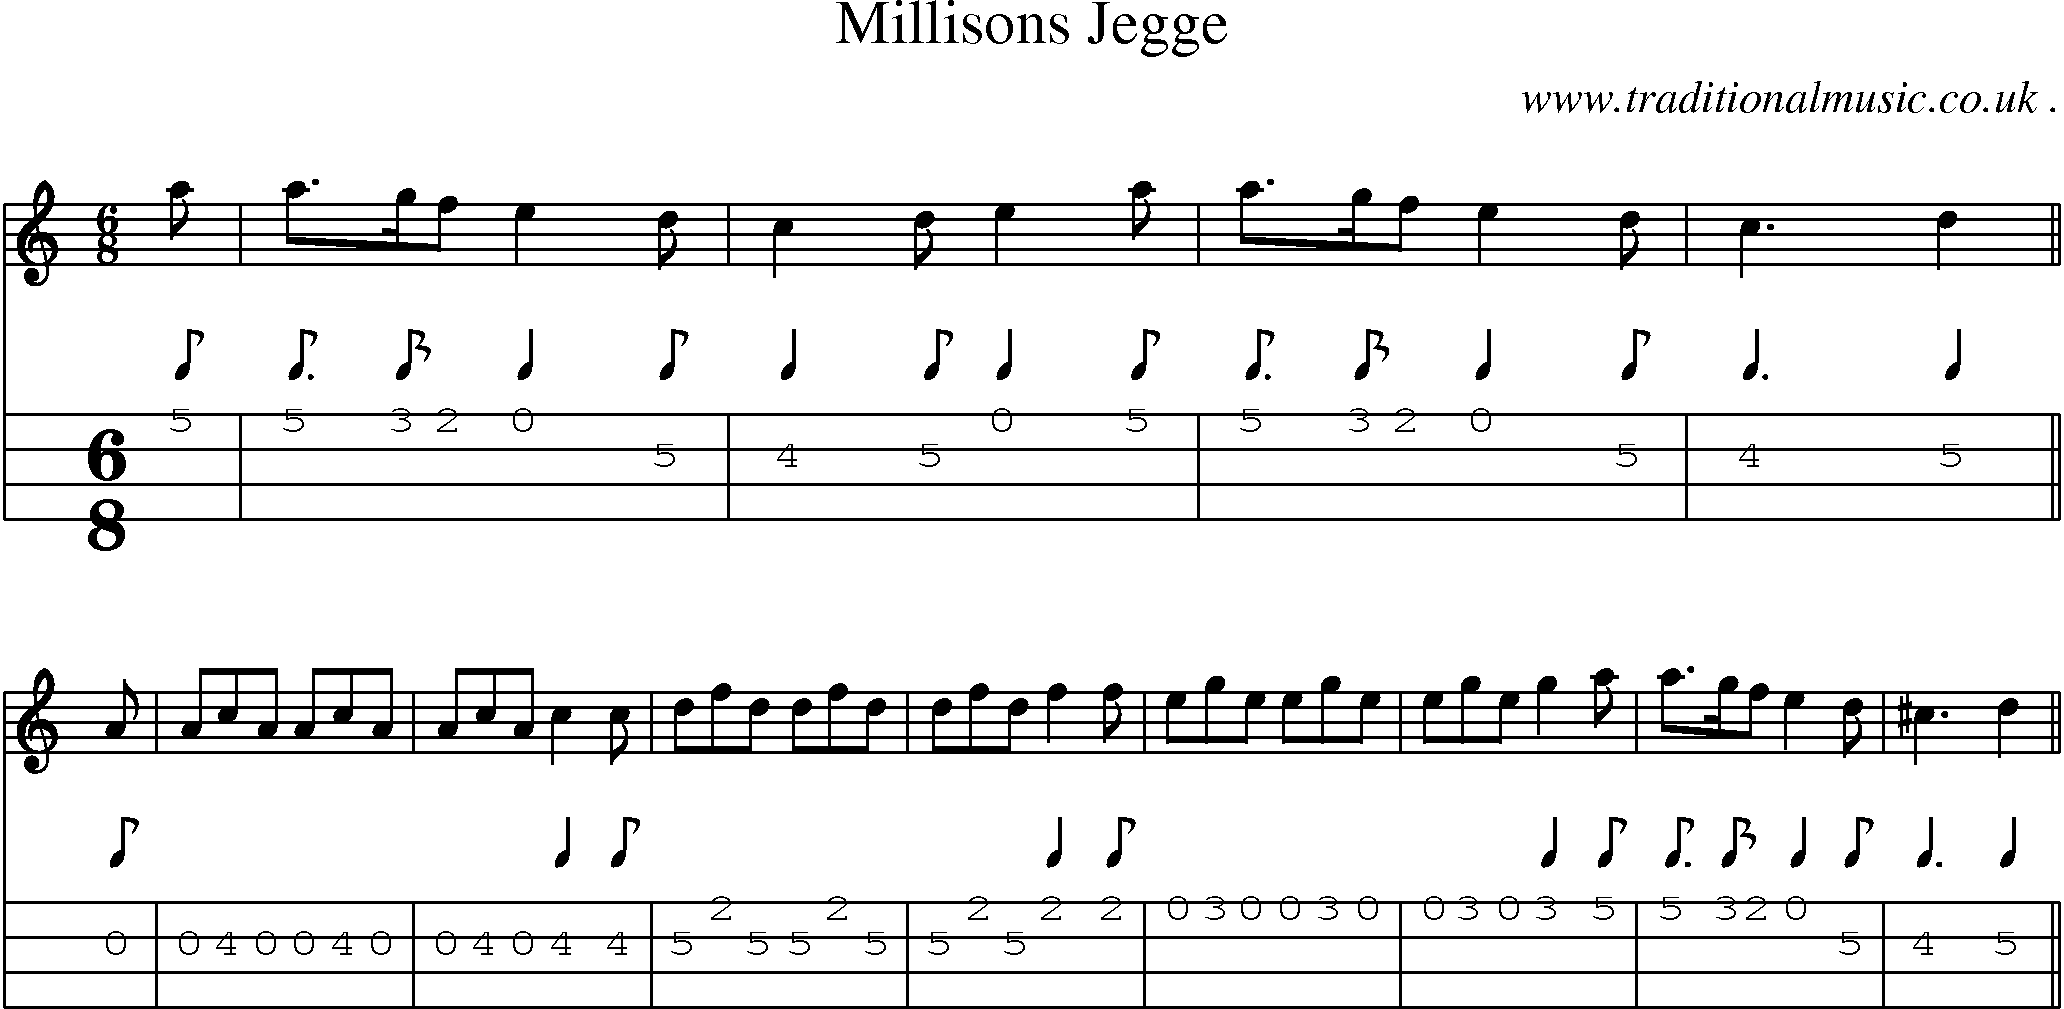 Sheet-music  score, Chords and Mandolin Tabs for Millisons Jegge